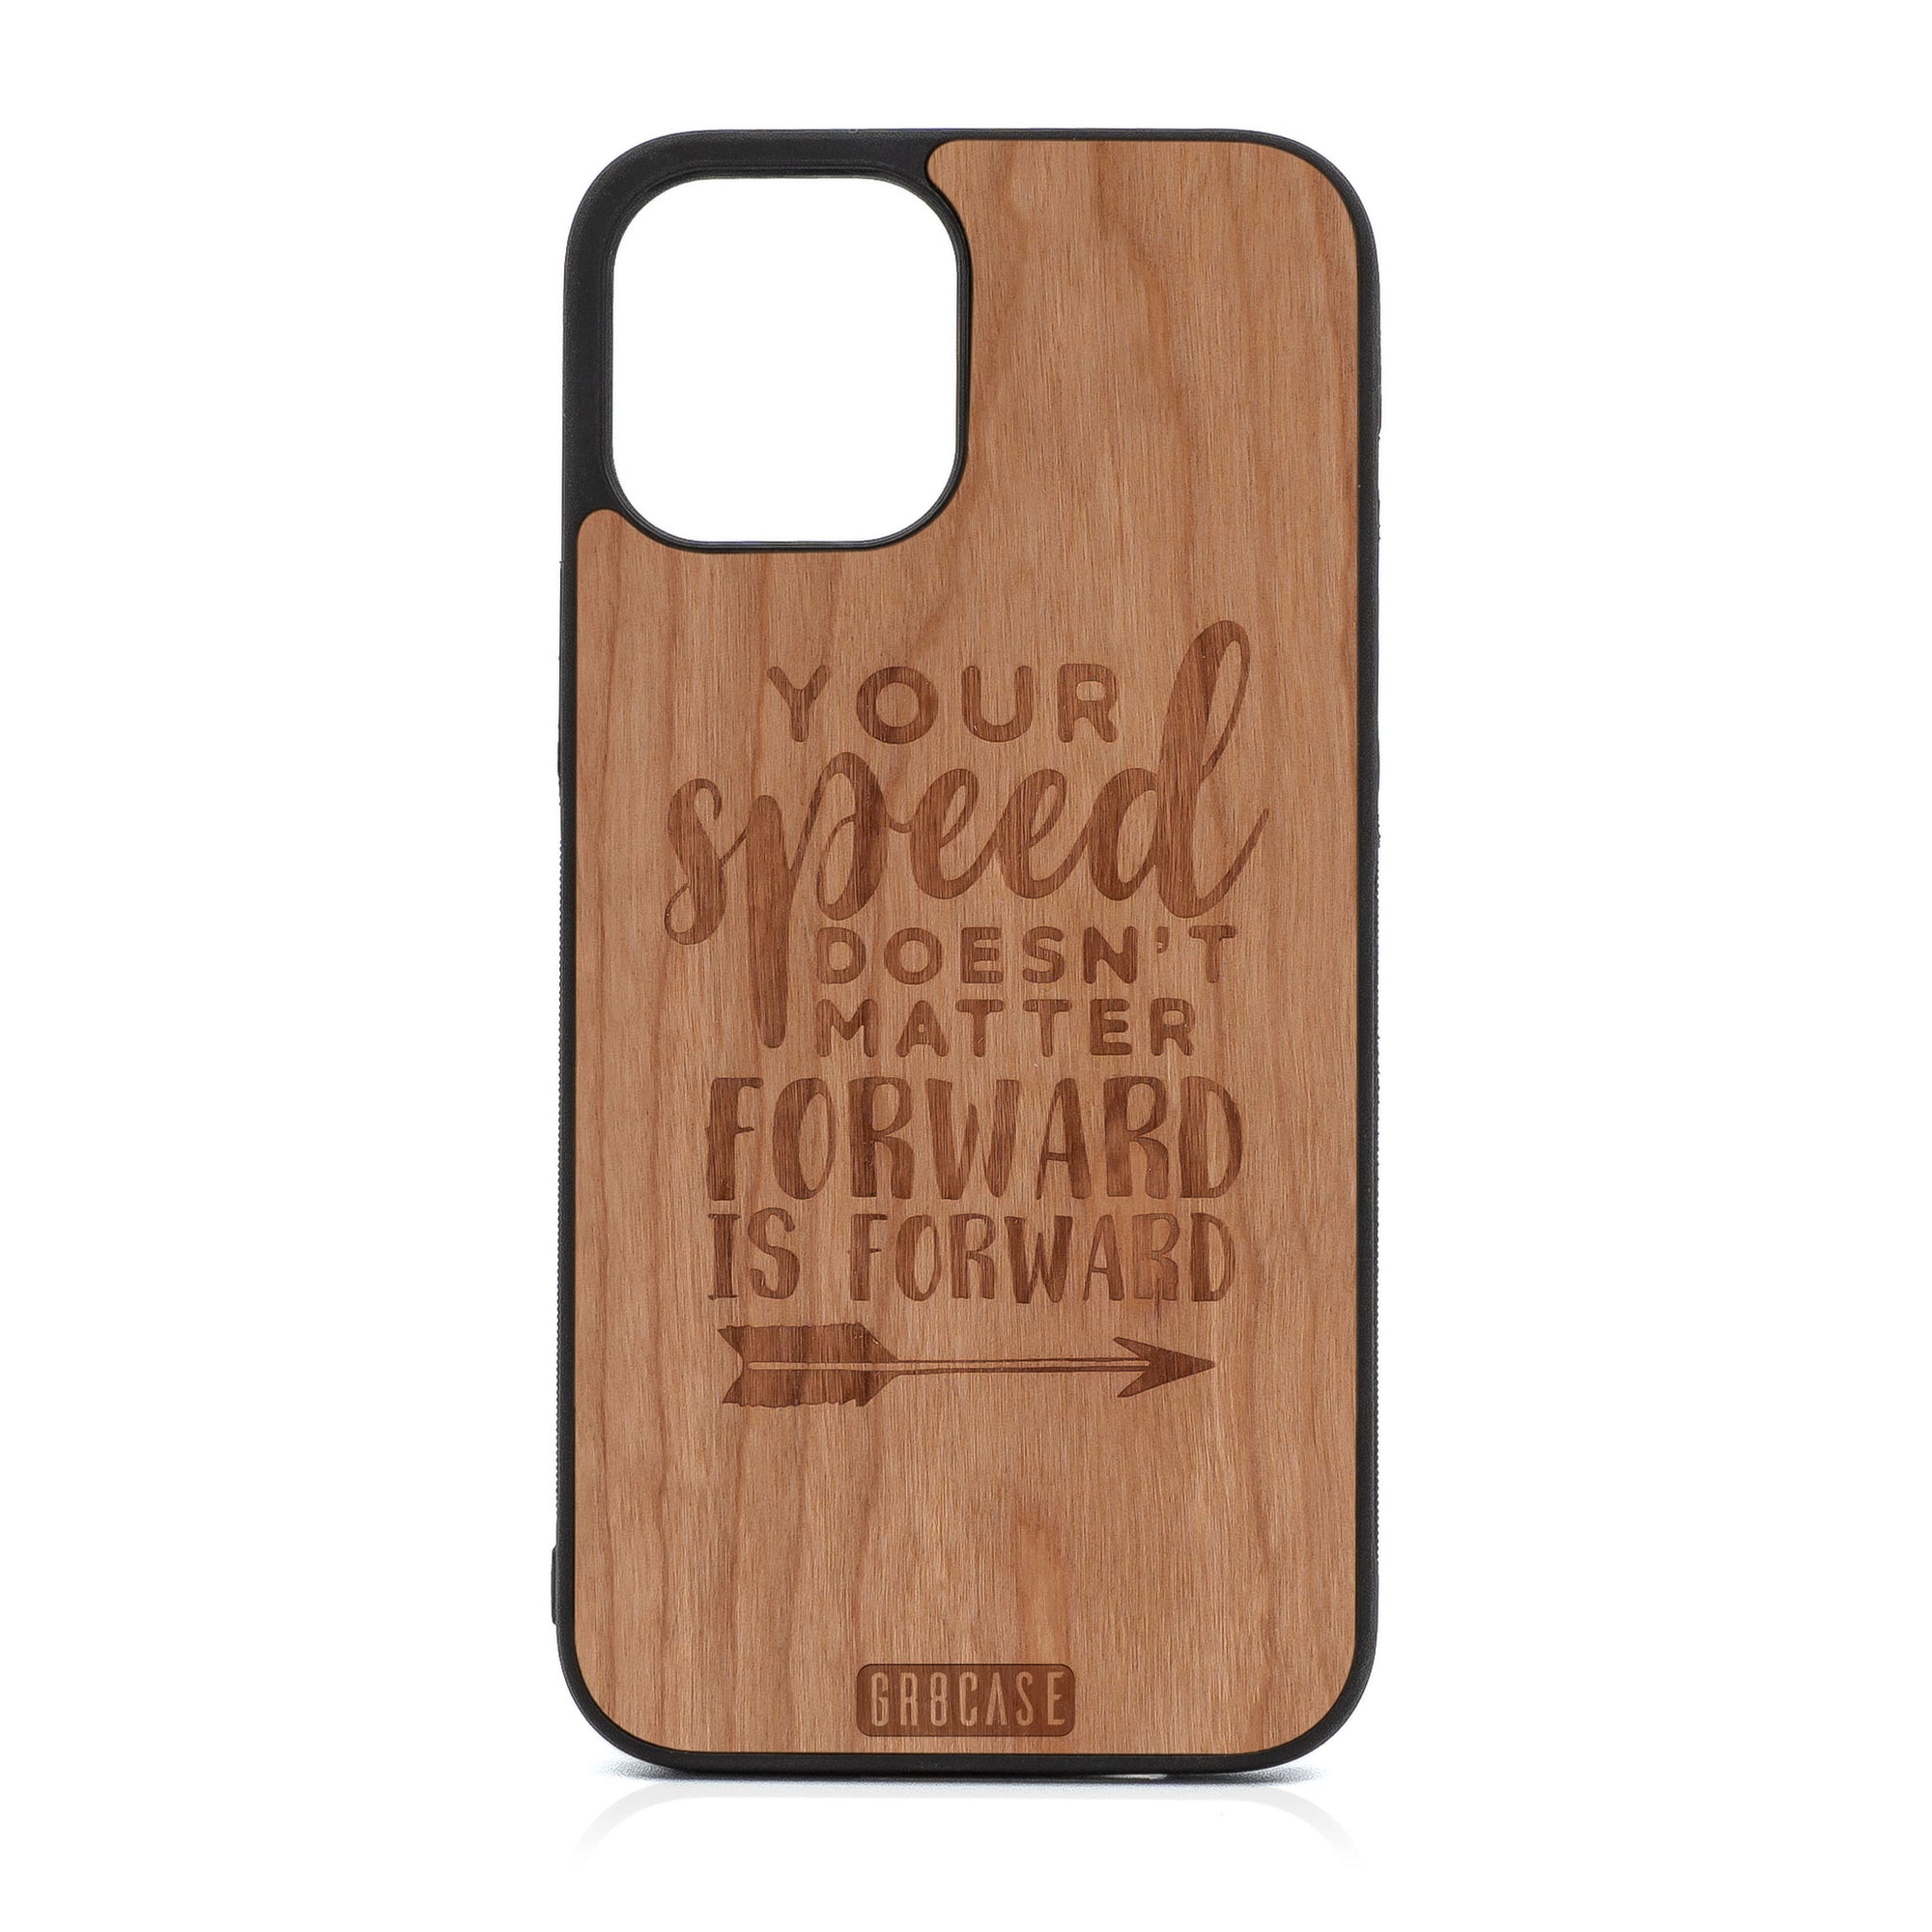 Your Speed Doesn't Matter Forward Is Forward Design Wood Case For iPhone 12 Pro Max